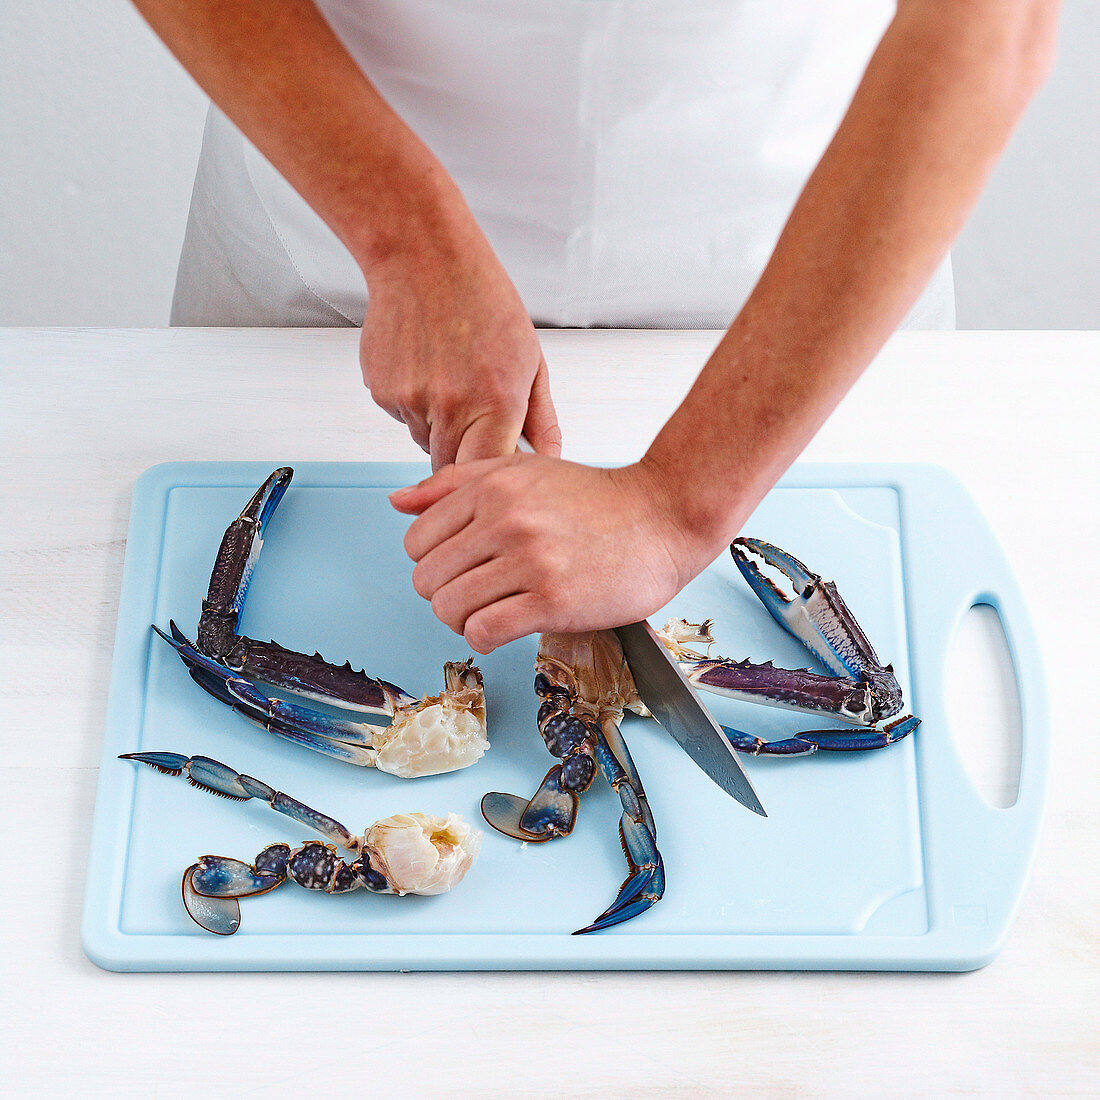 How to section raw or uncooked crab